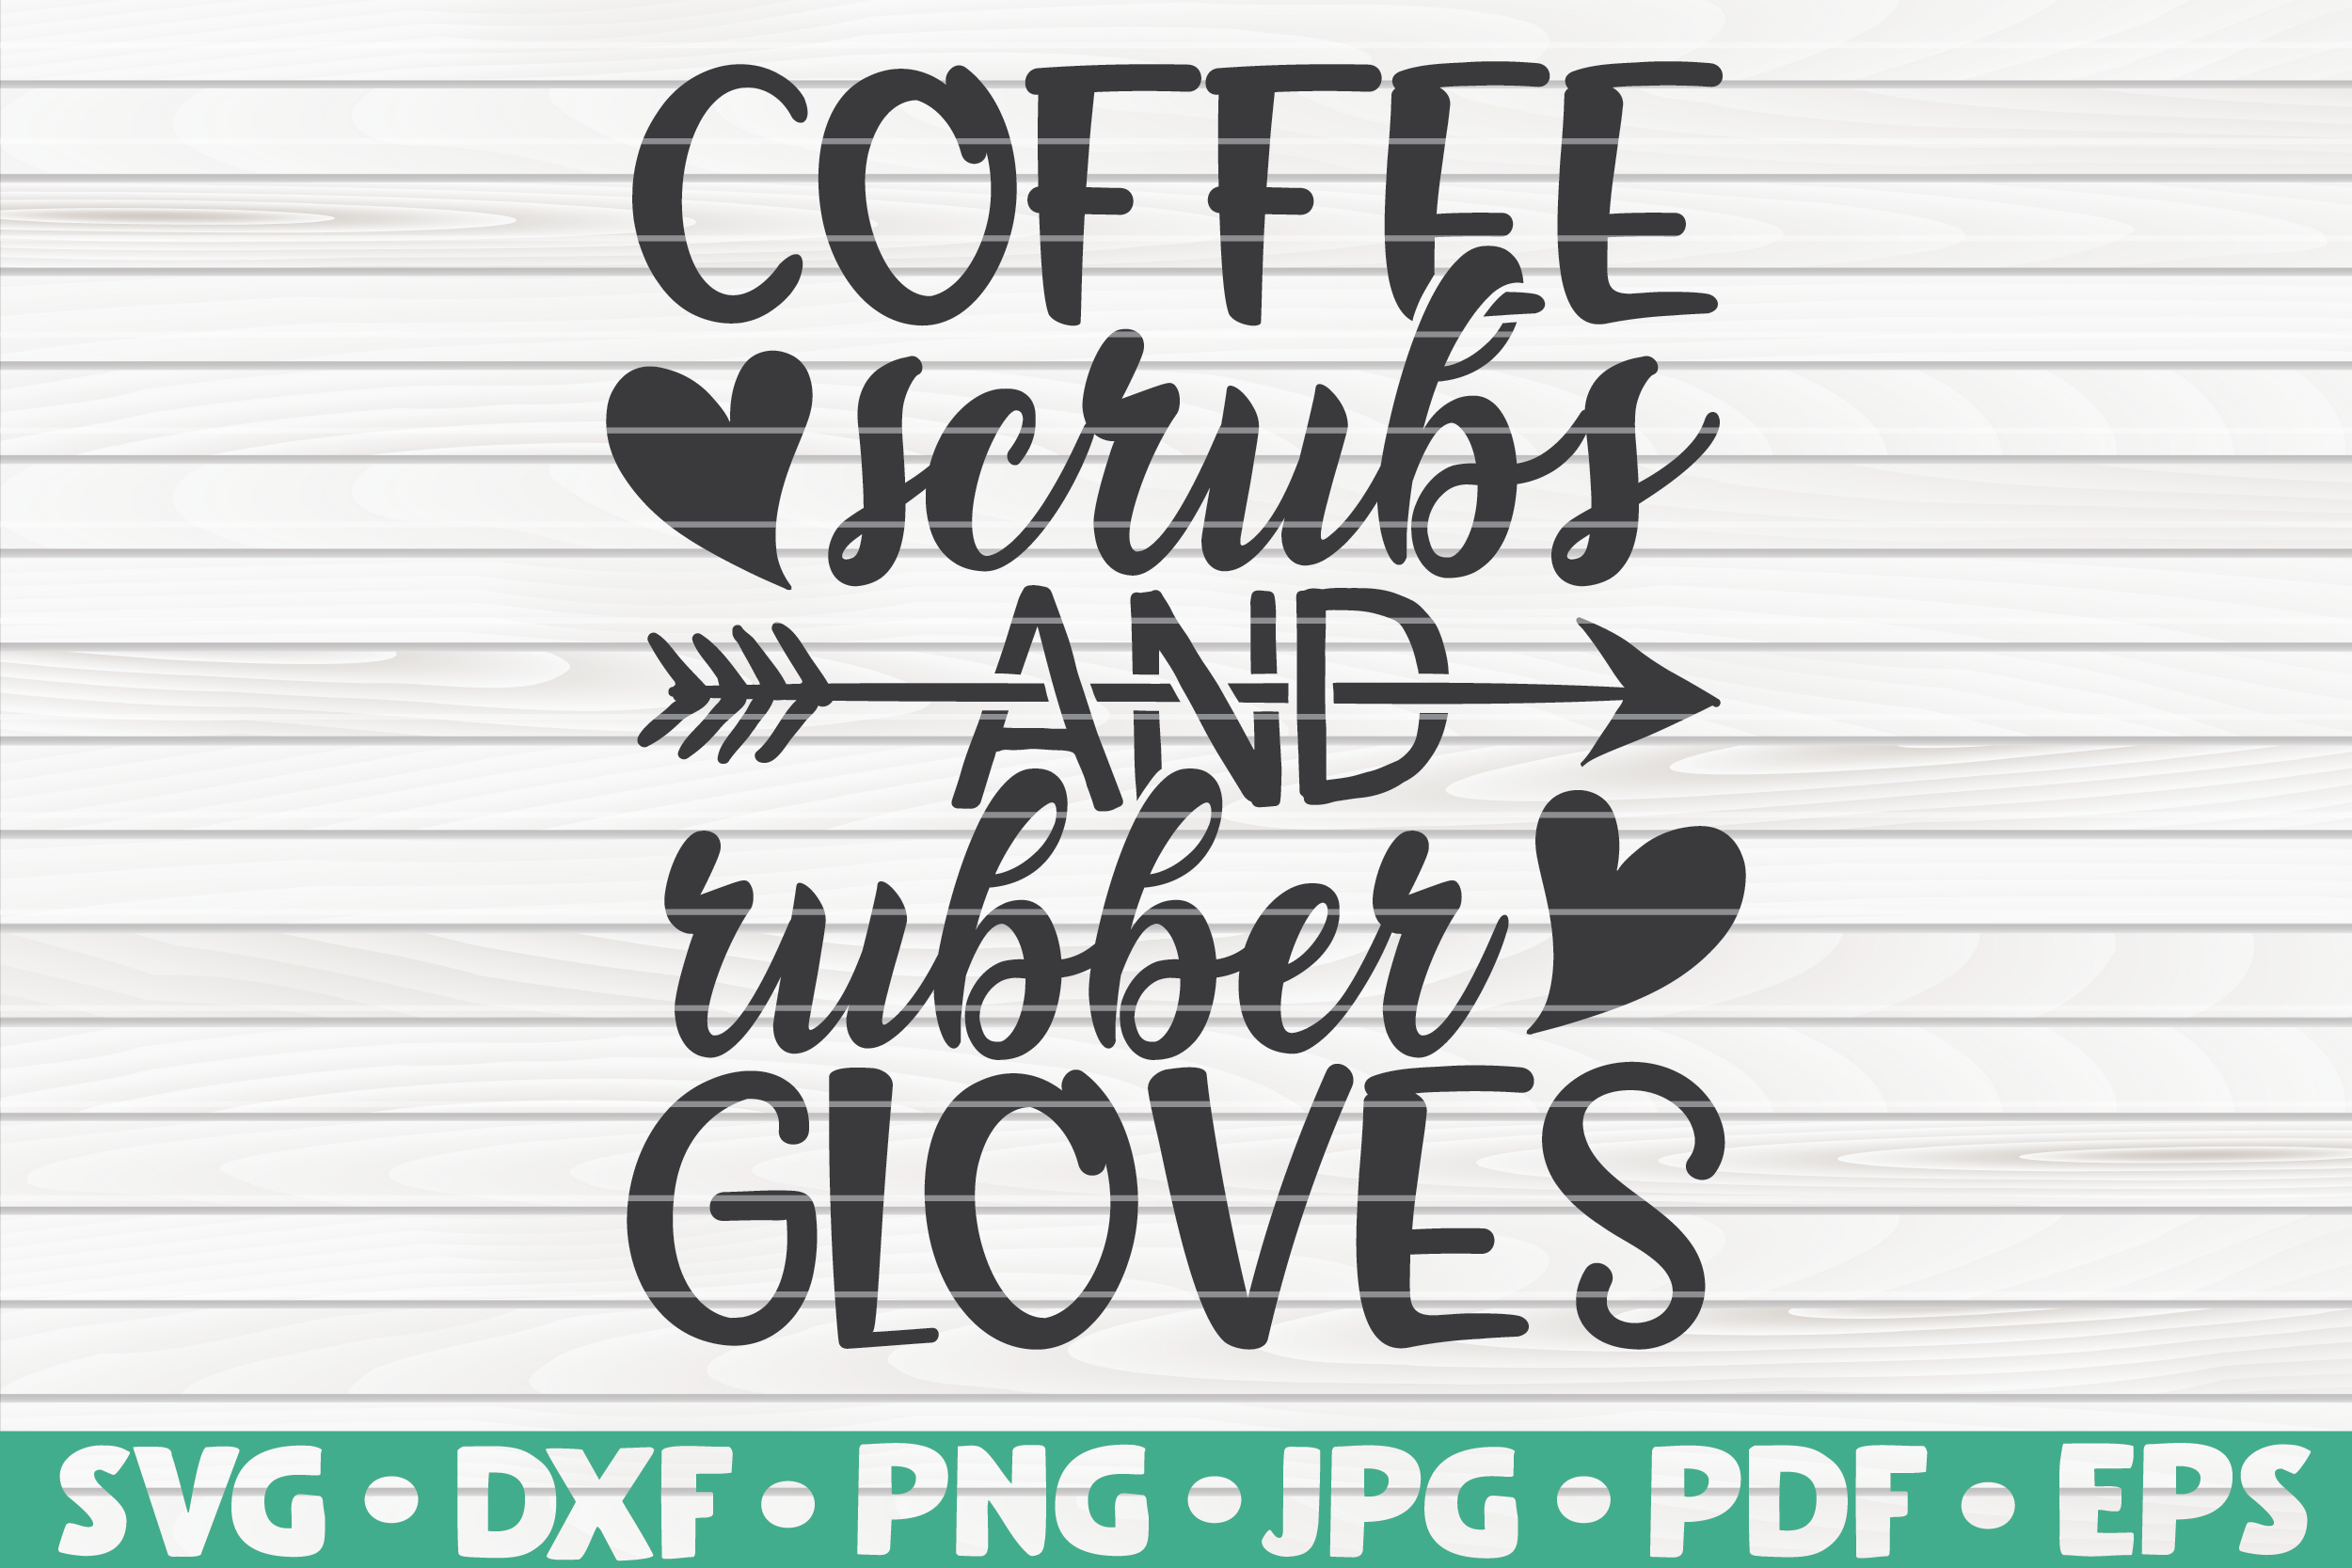 Download Coffee scrubs and rubber gloves SVG | Nurse Life By ...